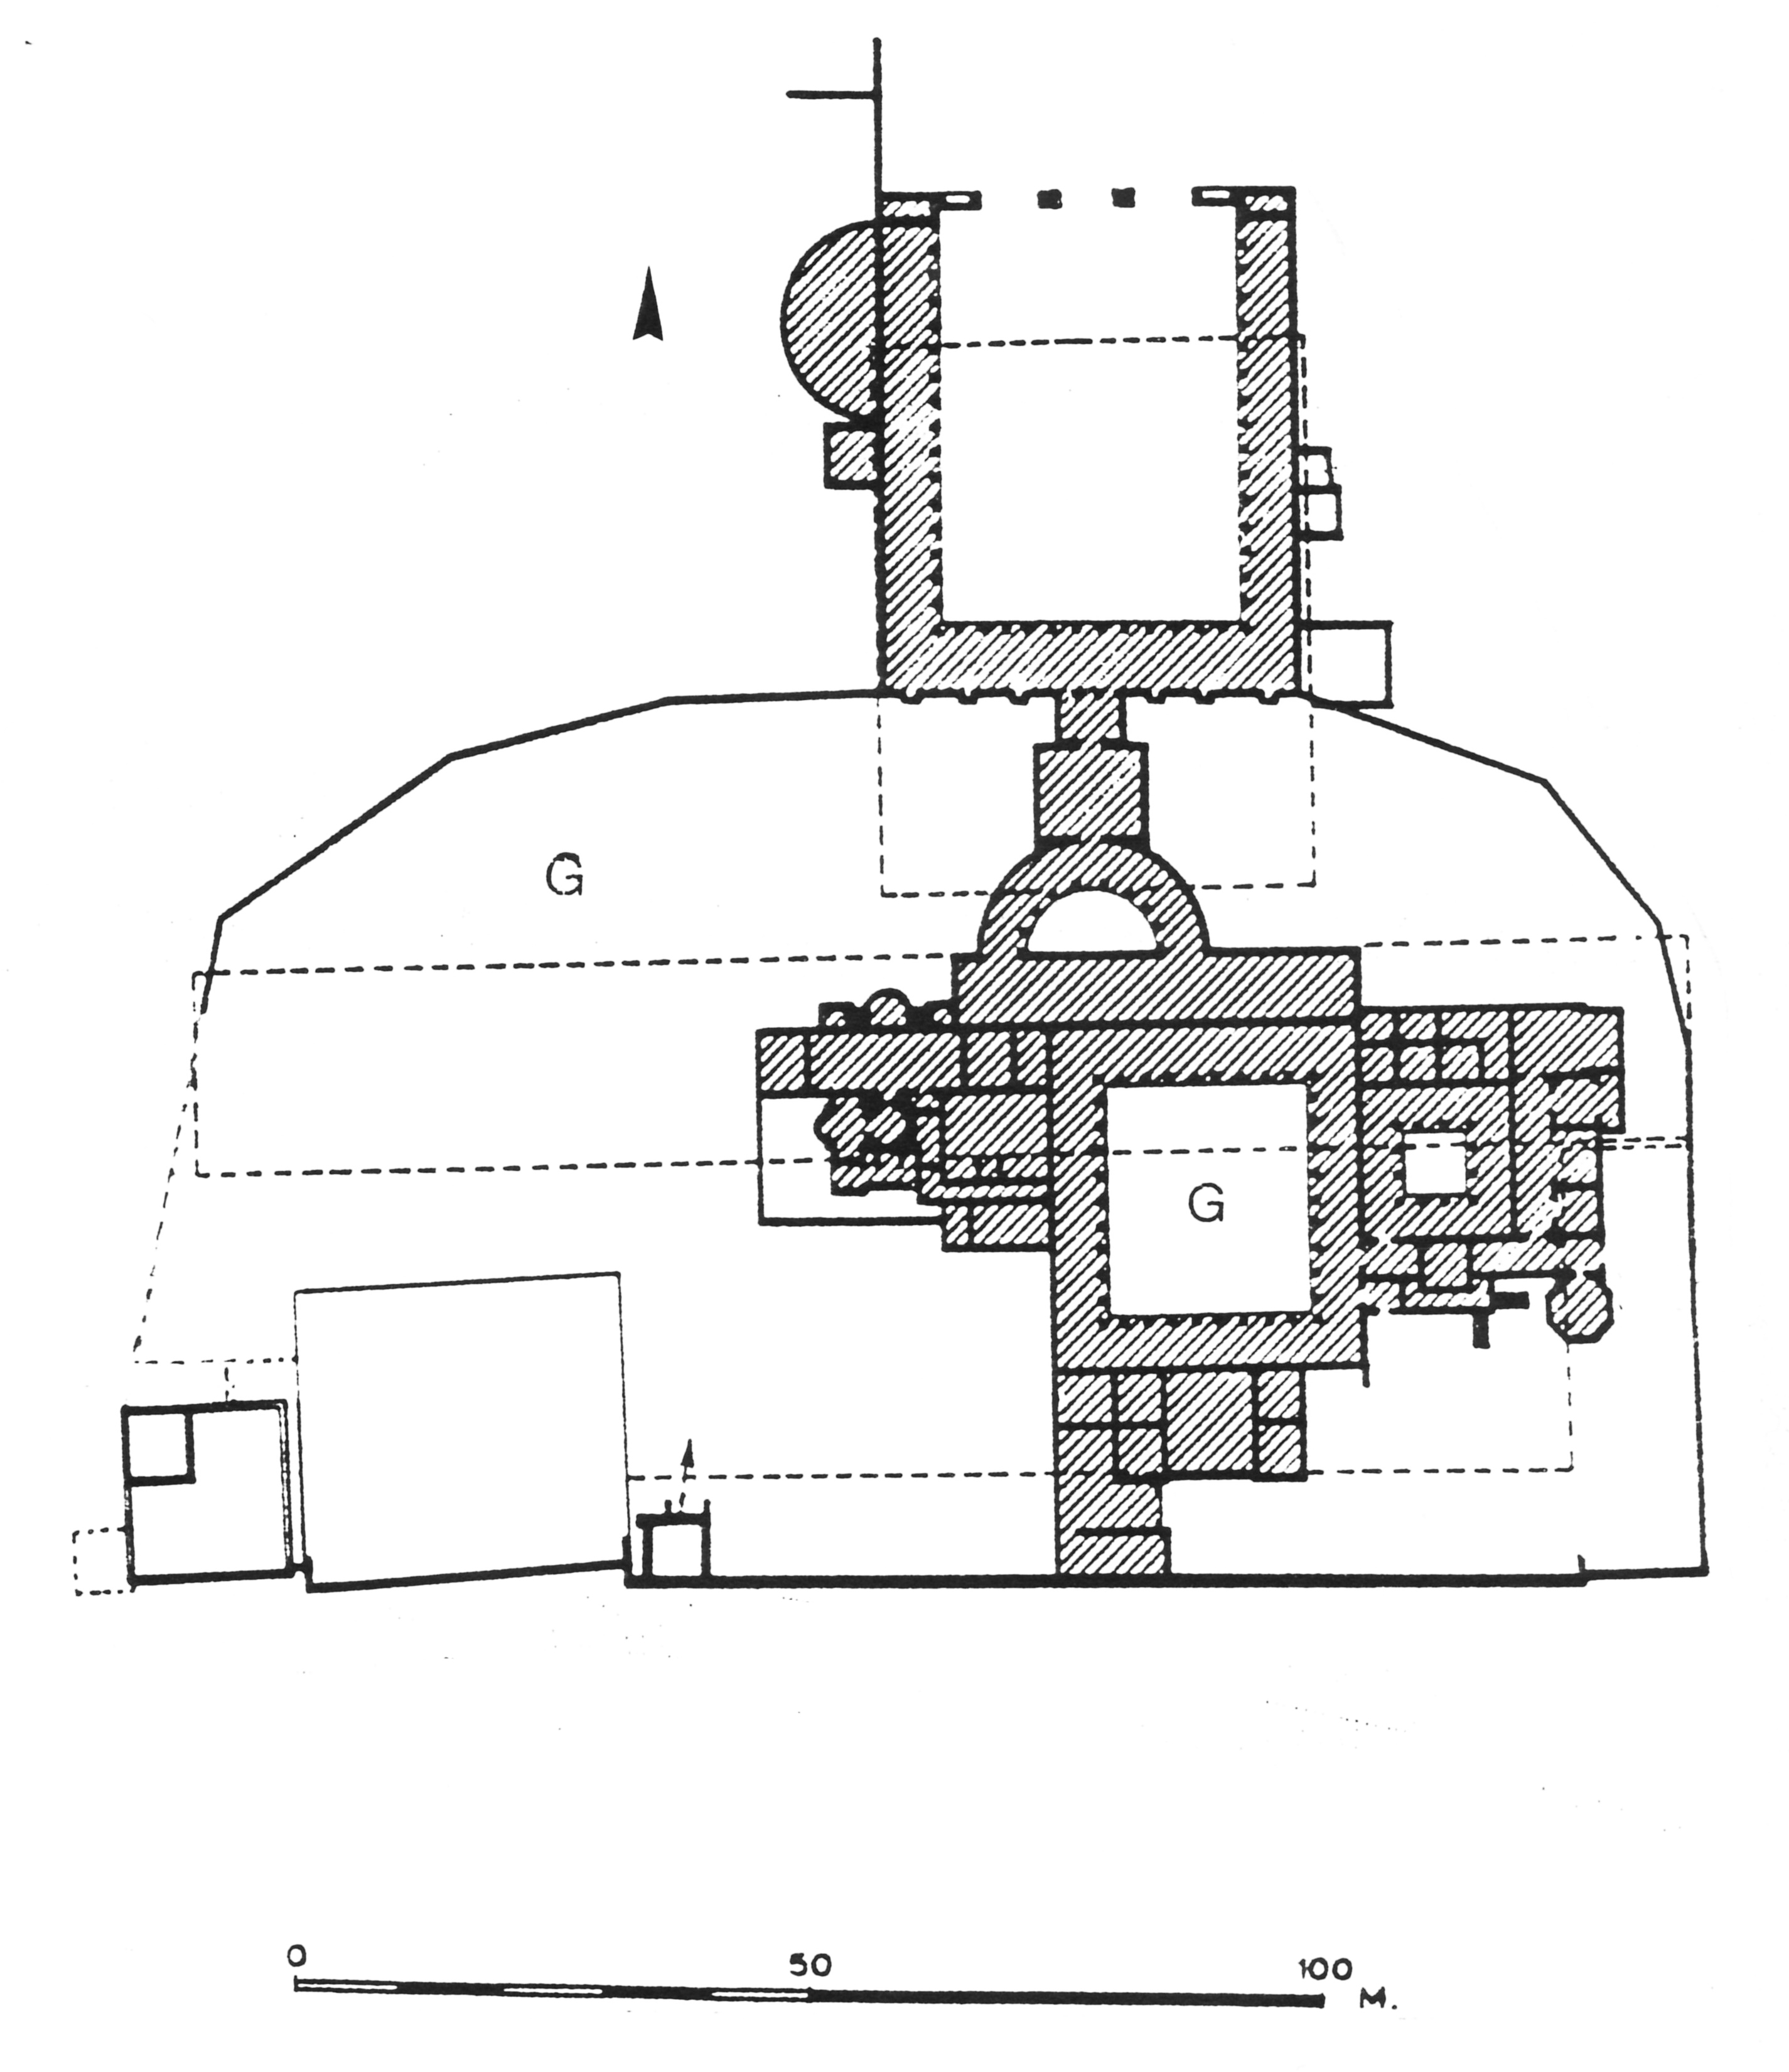 building plan with possible gardens marked, dotted lines for the outlines of earlier buildings.